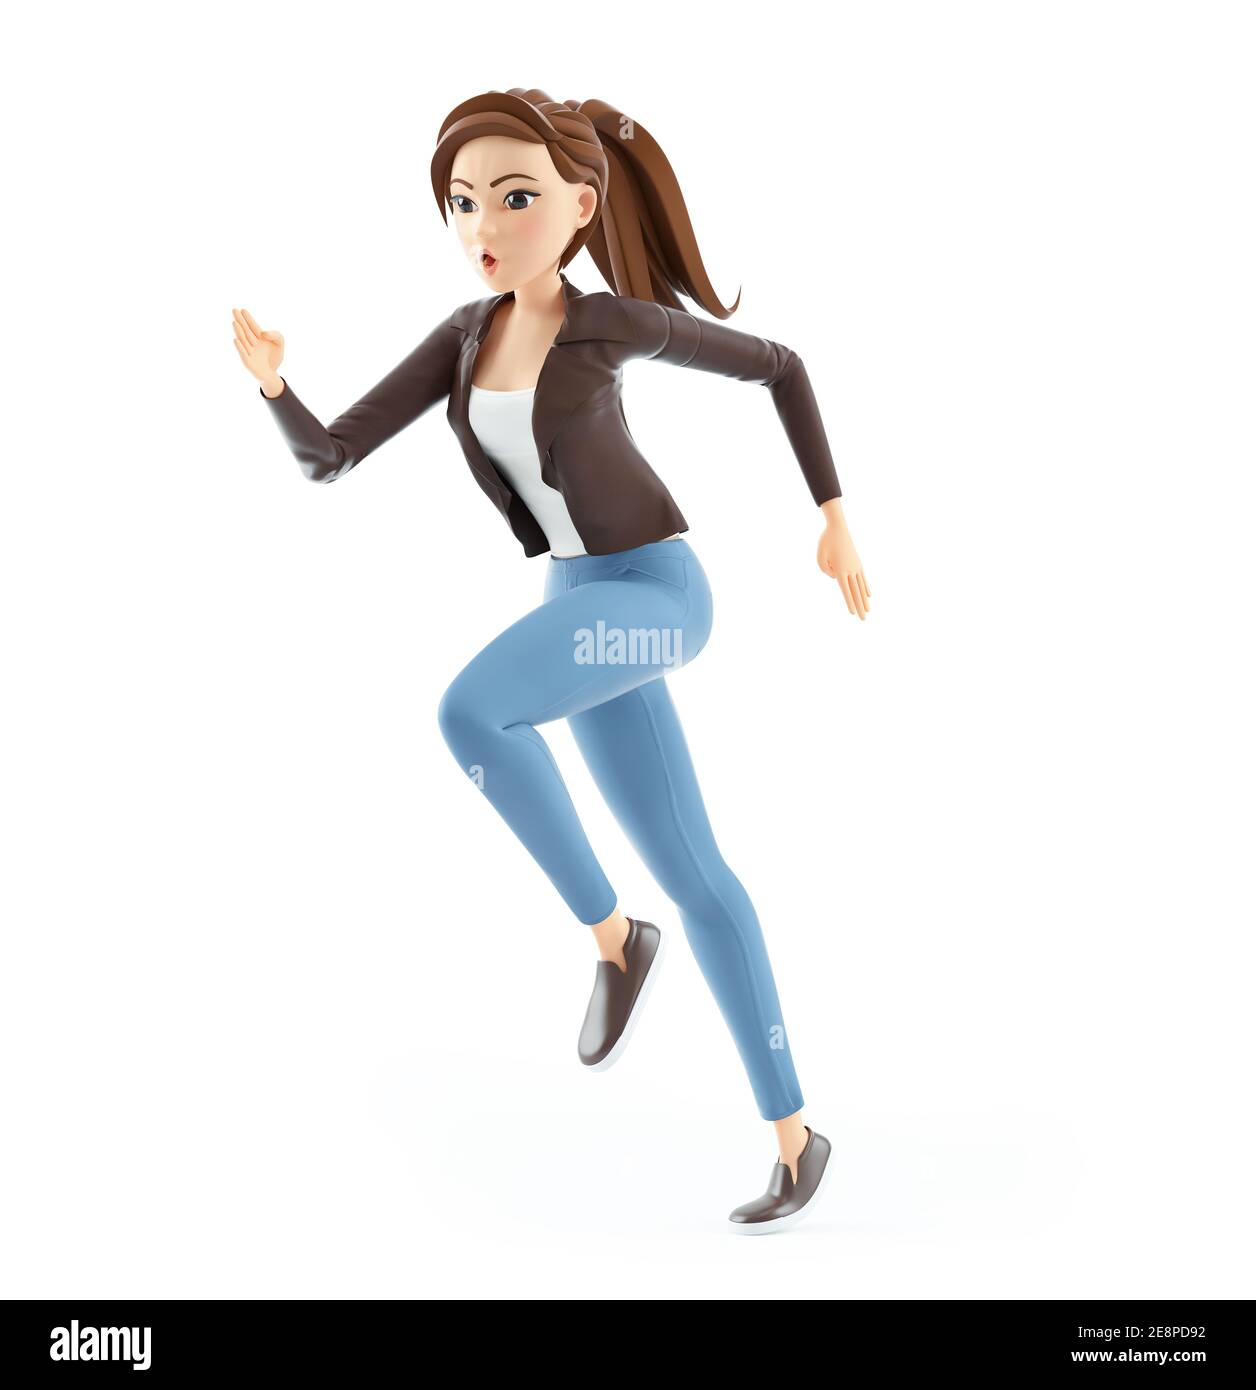 2,313,763 Mujer Corriendo Images, Stock Photos, 3D objects